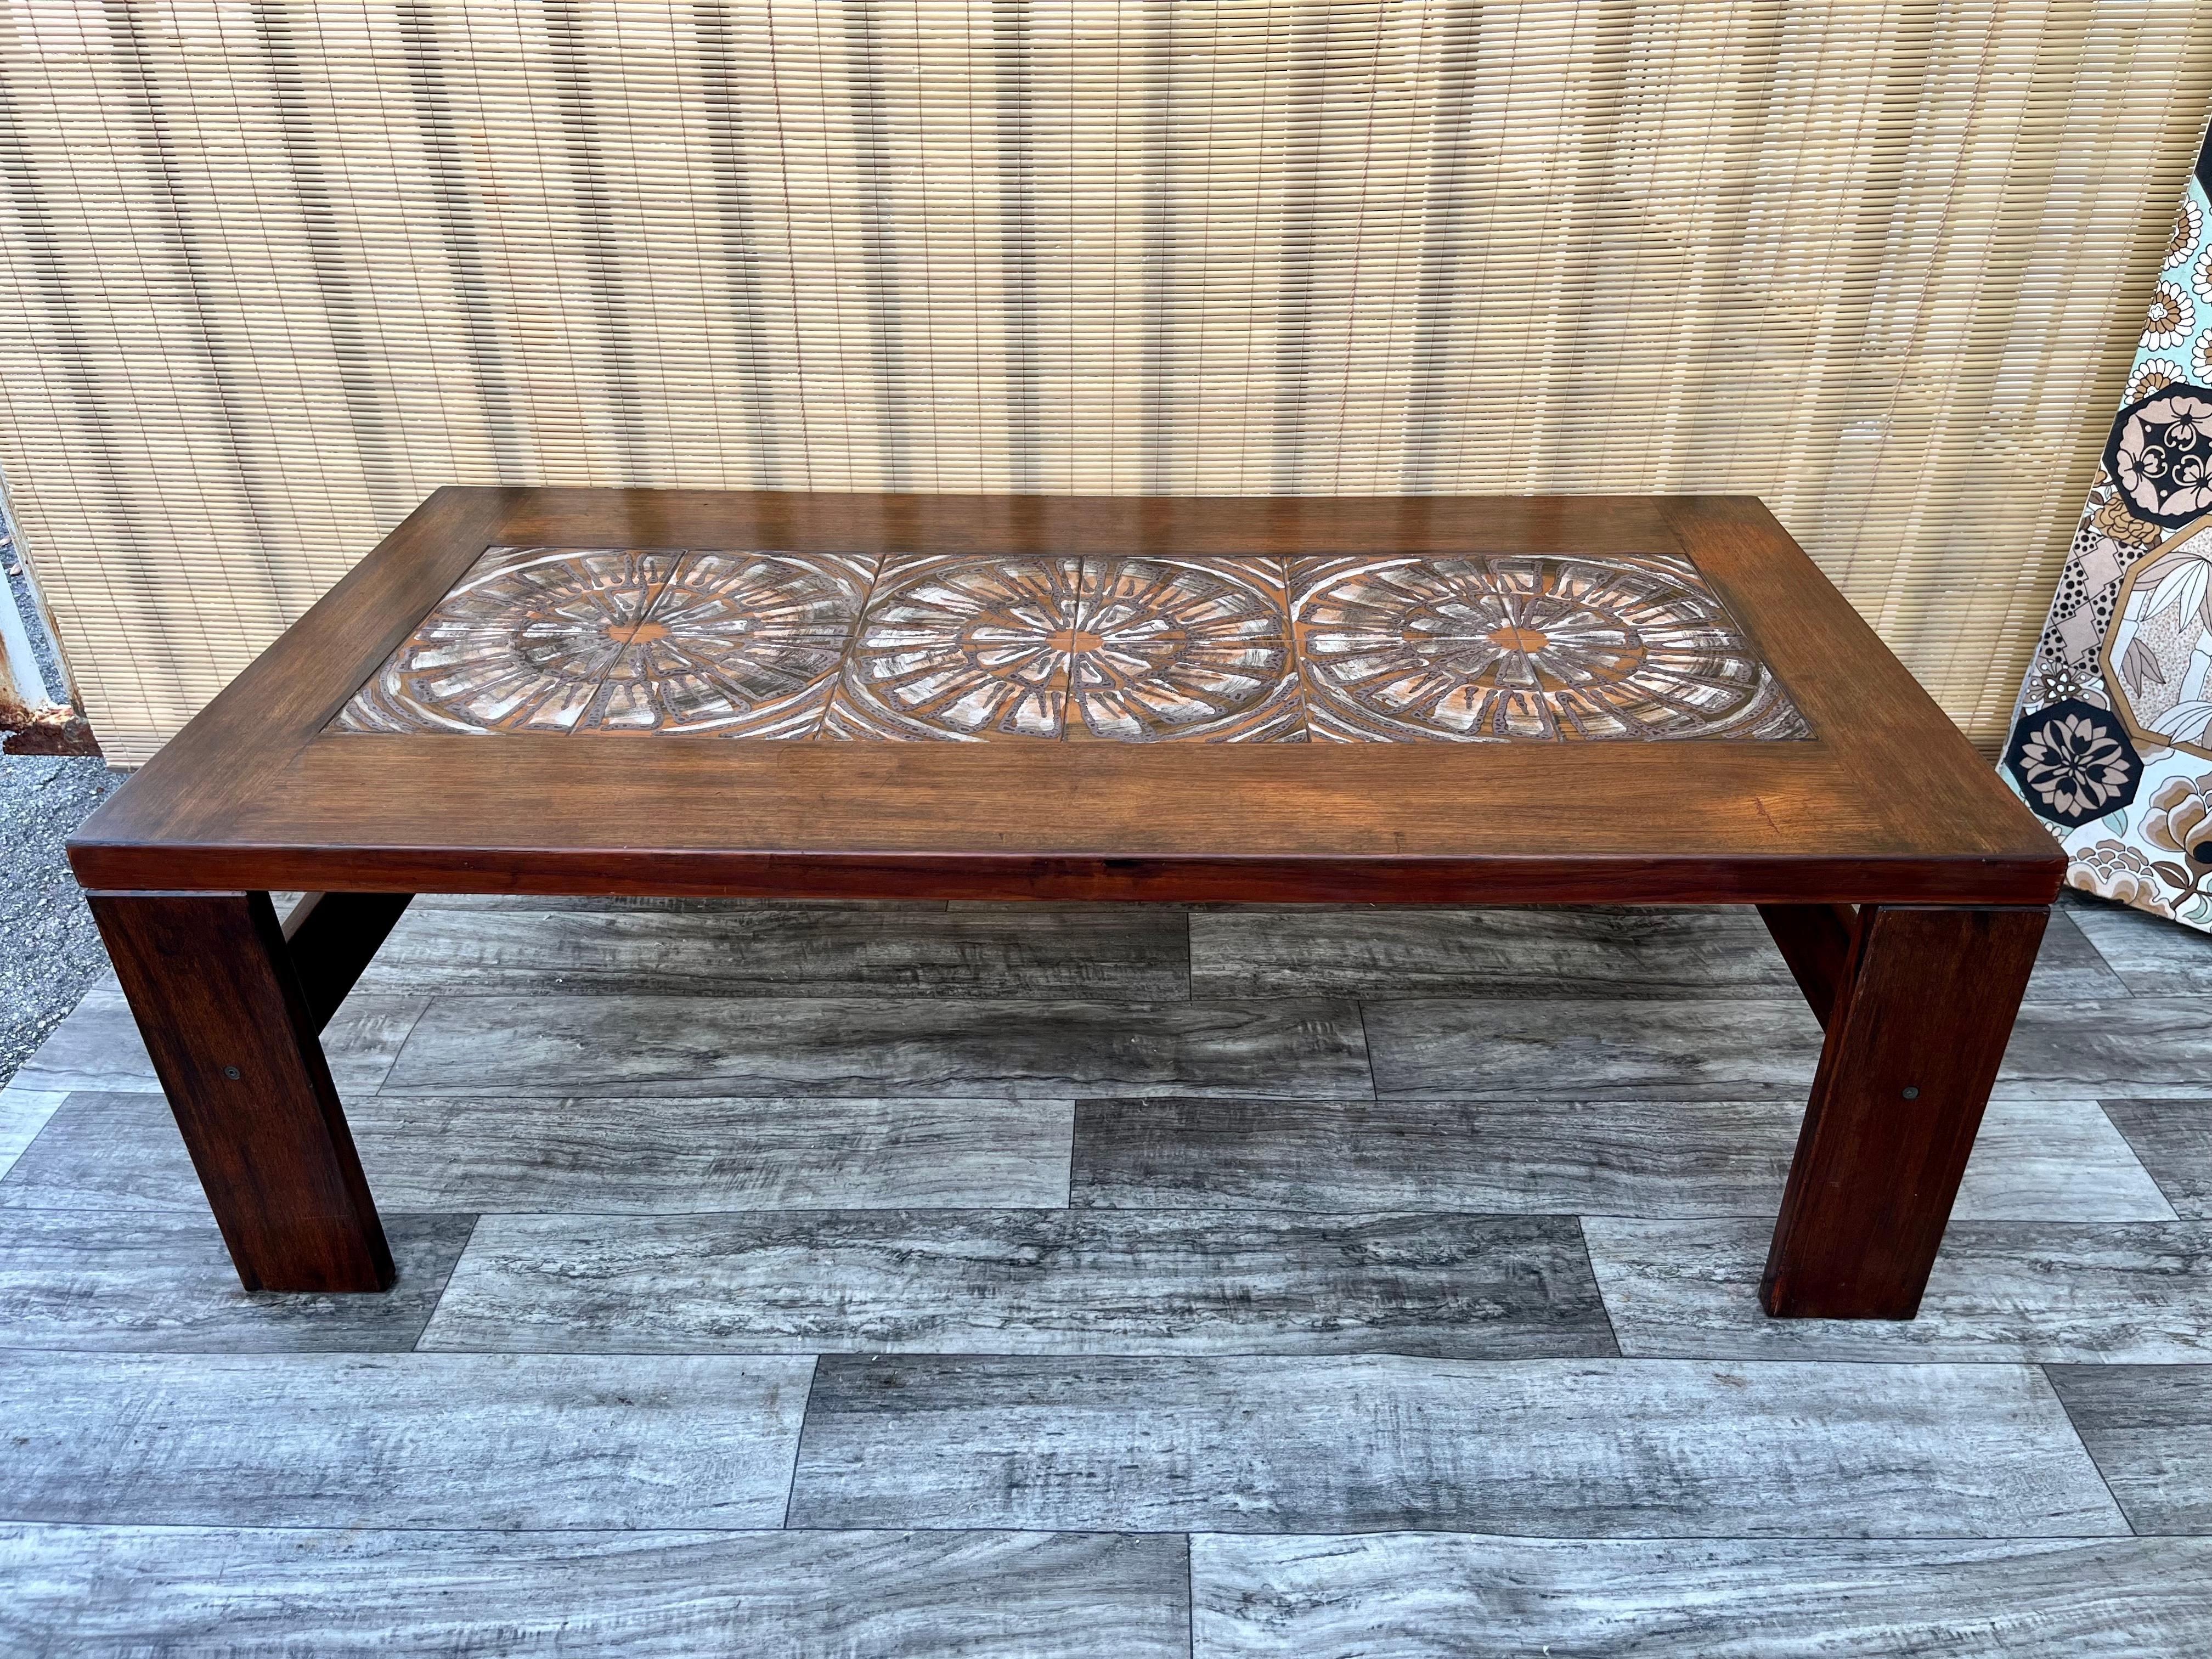 Mid-20th Century Danish Mid Century Modern Coffee Table With Ceramic Tile Inlays. Circa 1960s  For Sale